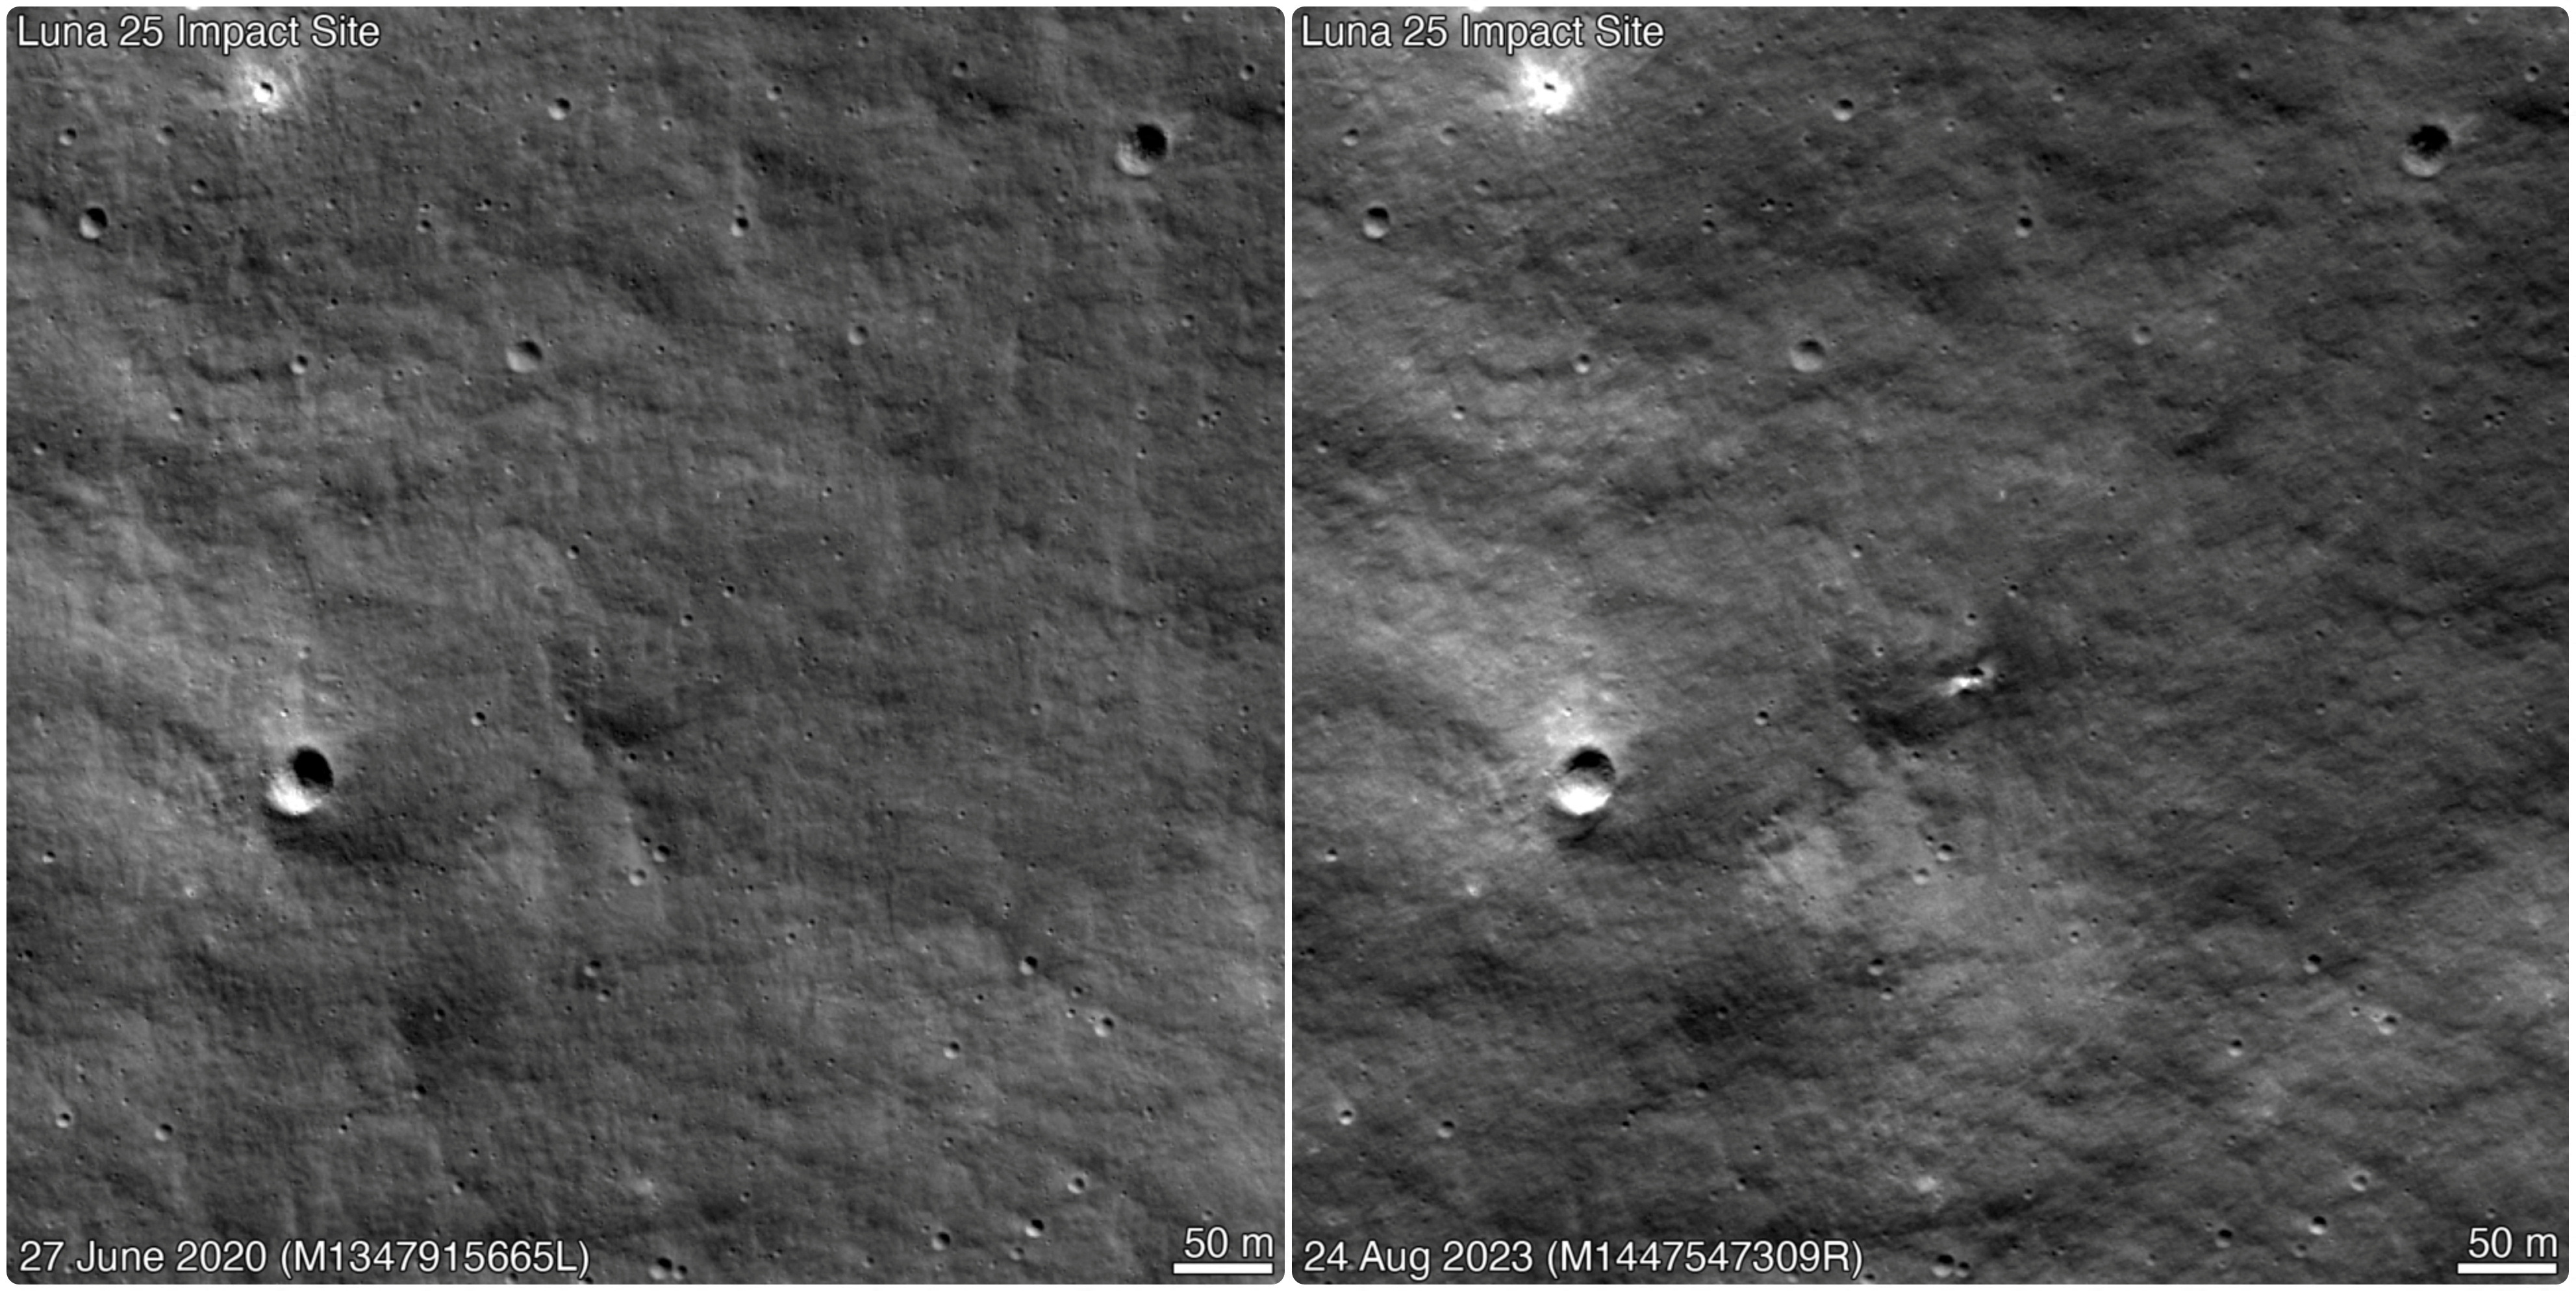 Combination image shows the surface of the moon before and after the appearance of a crater